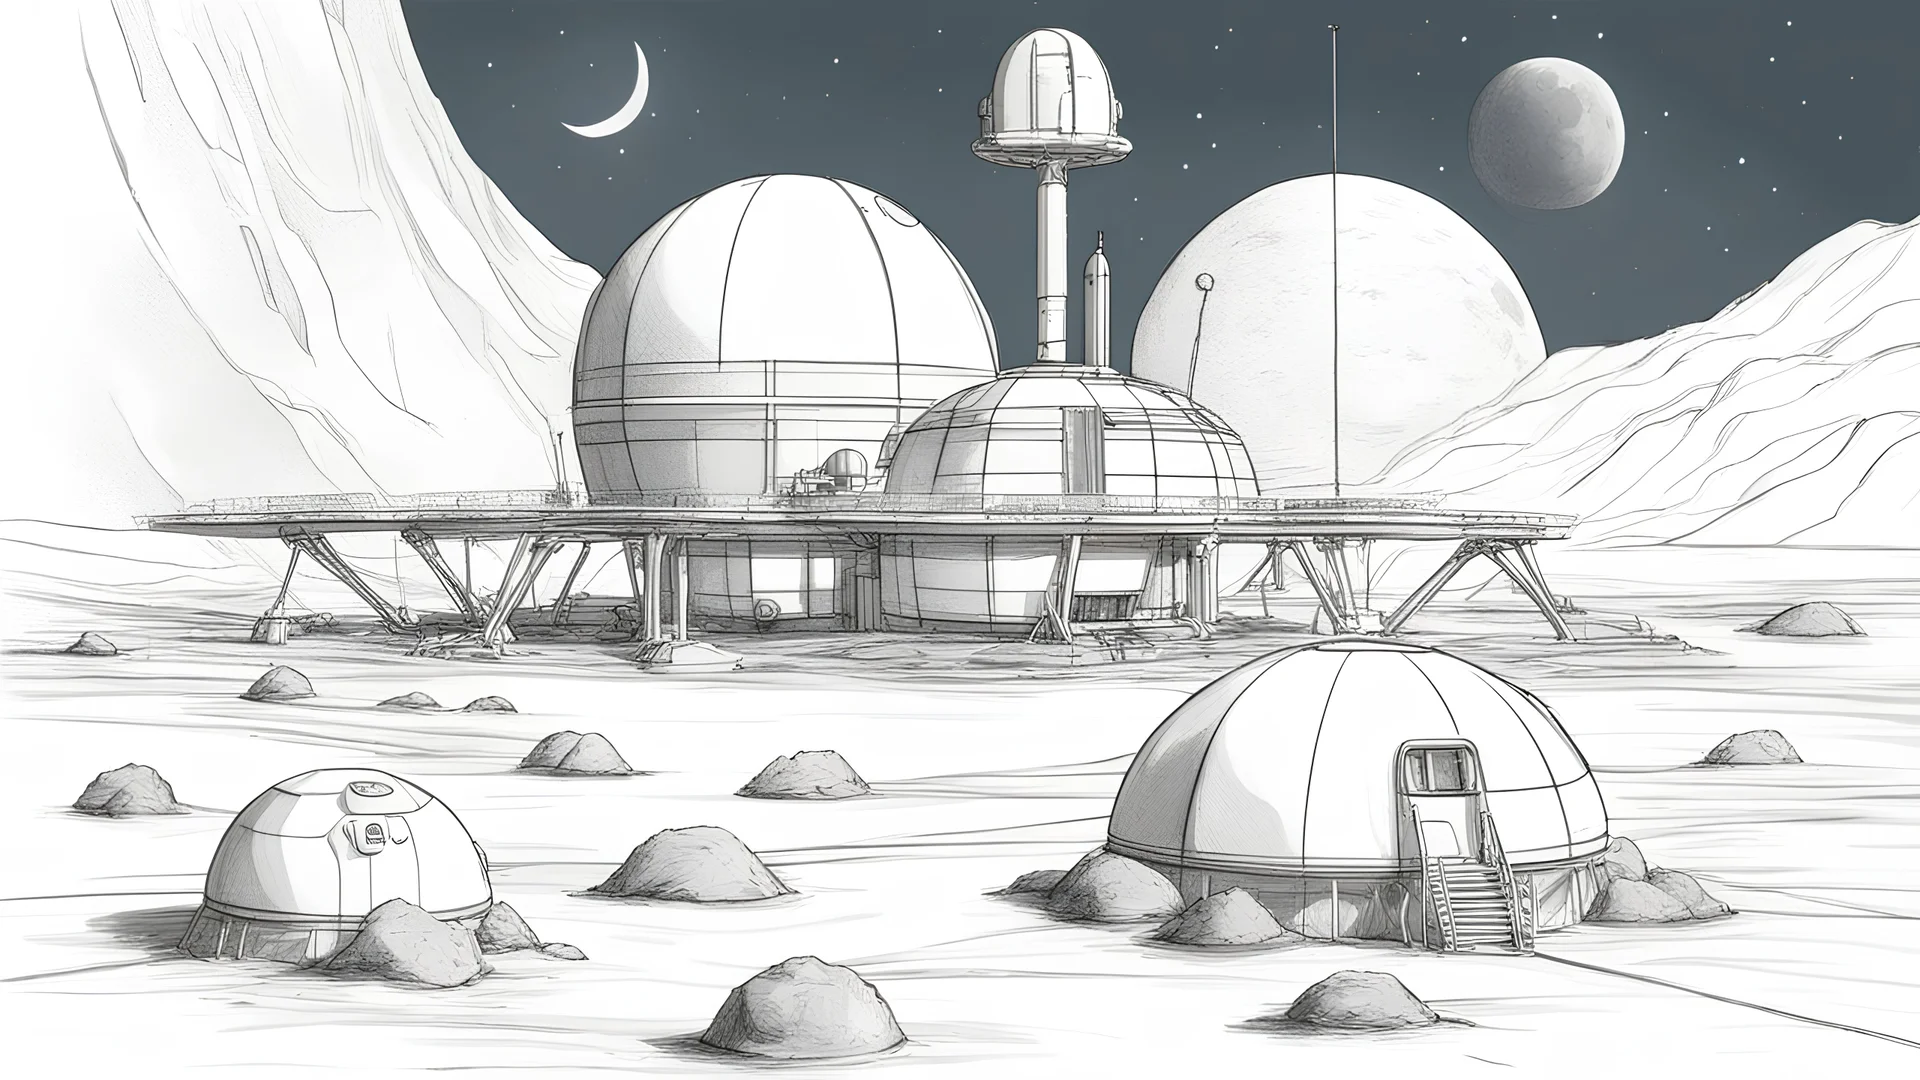 sketch drawing of tranquility base colony on the moon, sci fi futristic dome structure with oxygen tank and farms. moon base.